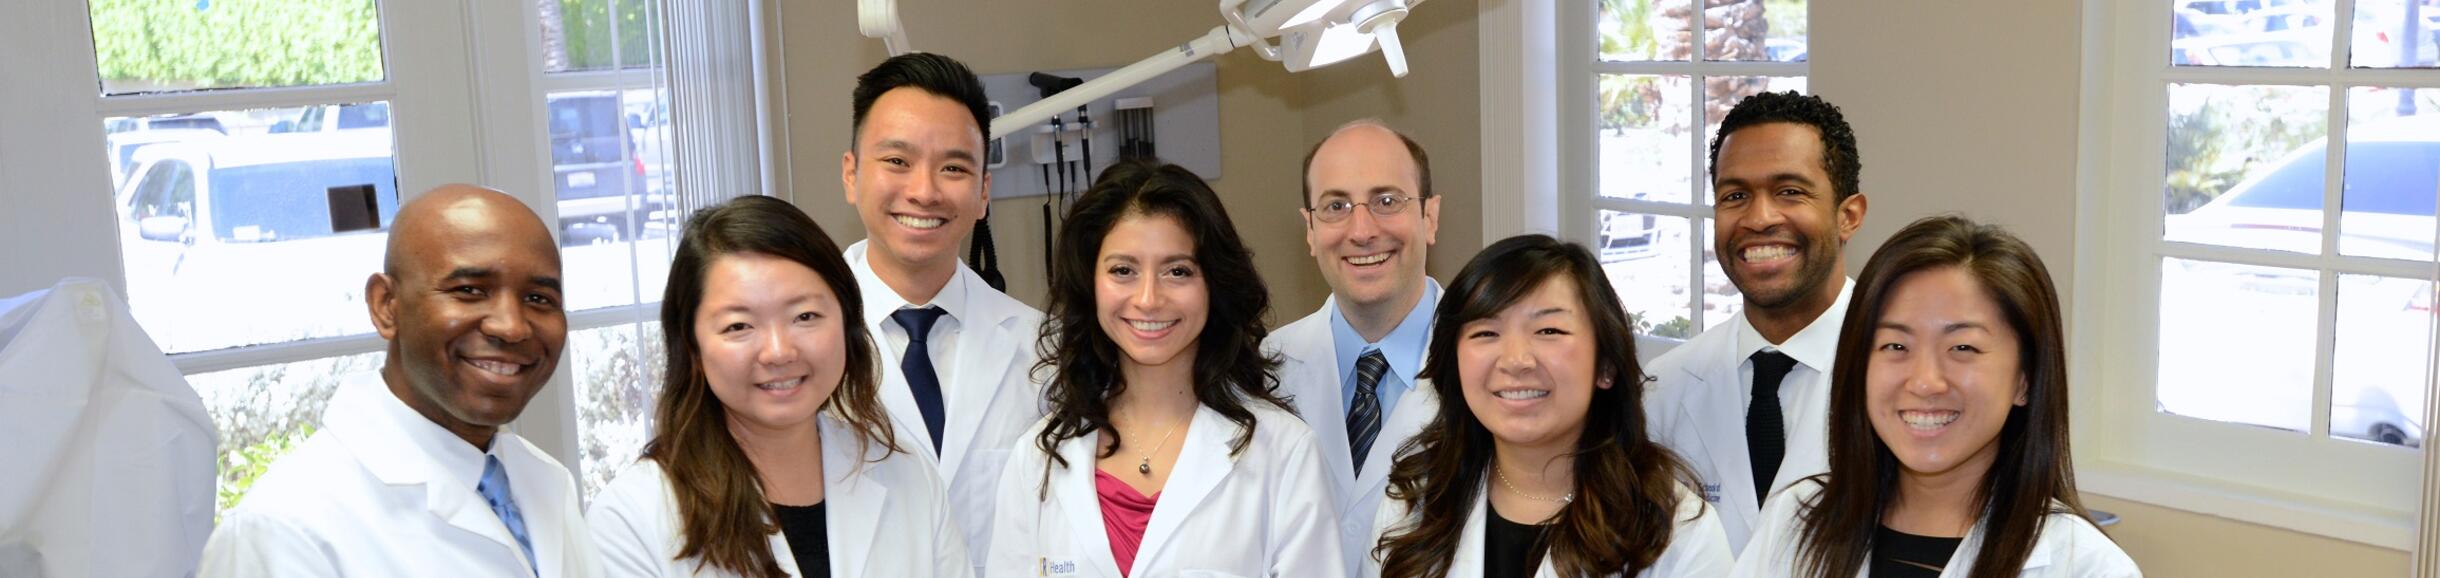 Family medicine resident inaugural class